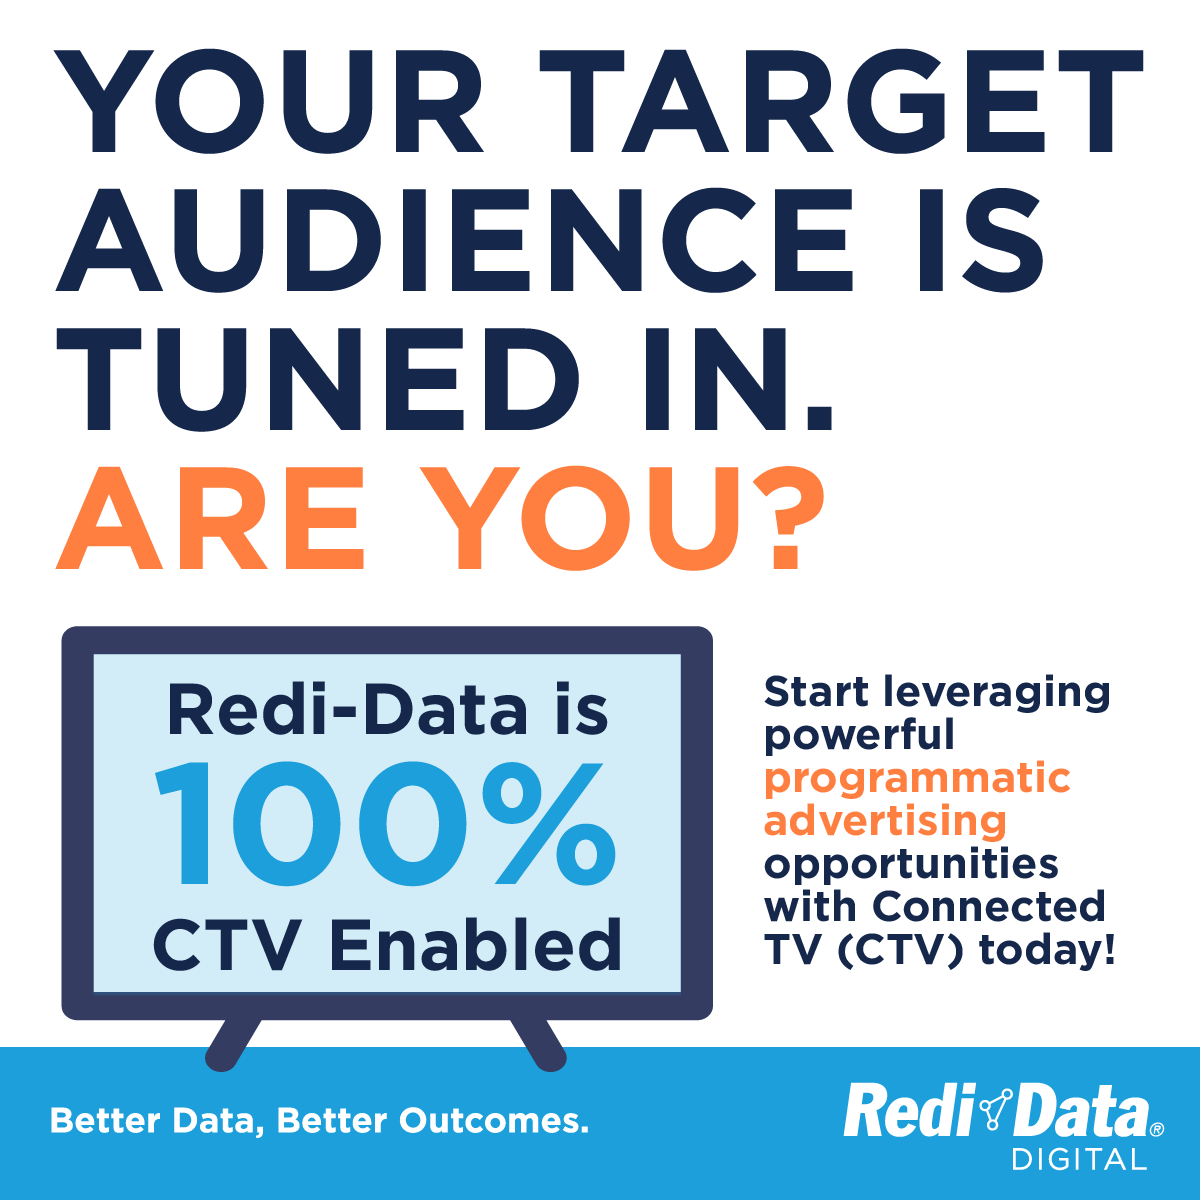 Precision matters! Redi-Data is 100% CTV enabled! Take your next marketing campaign to new dimensions with Redi-Data! #ConnectedTV #CTV #Programmatic #ProgrammaticAdvertising